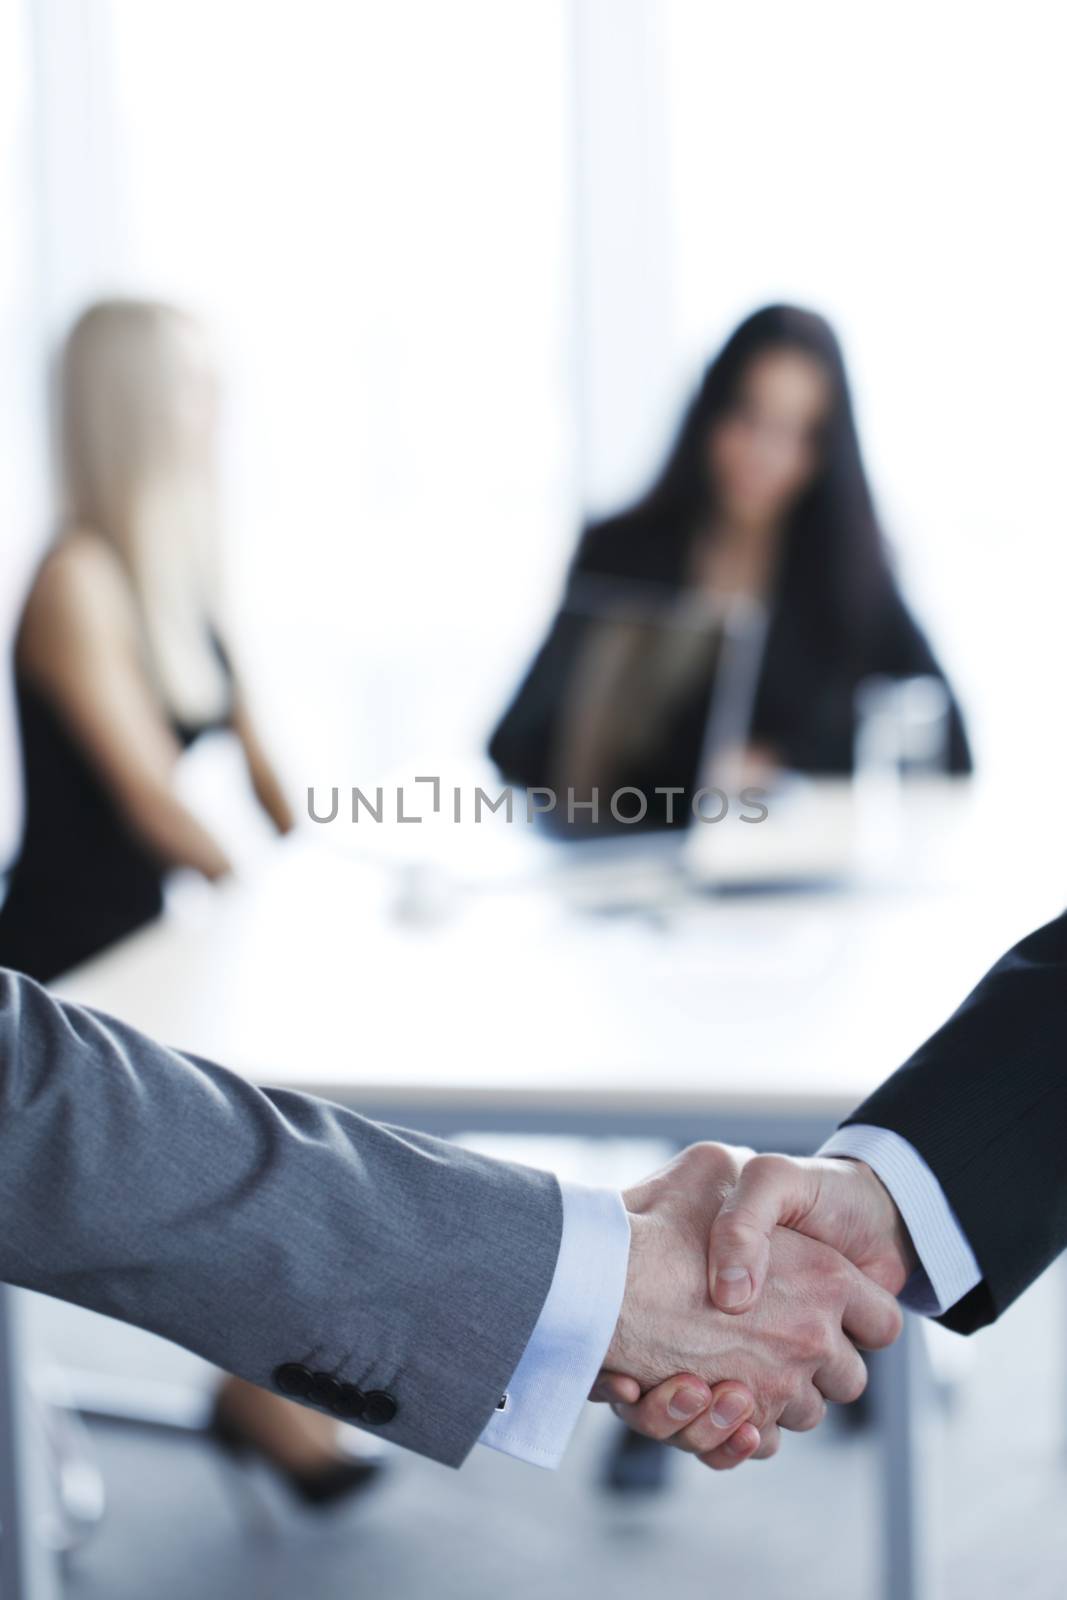 Business people shaking hands by ALotOfPeople